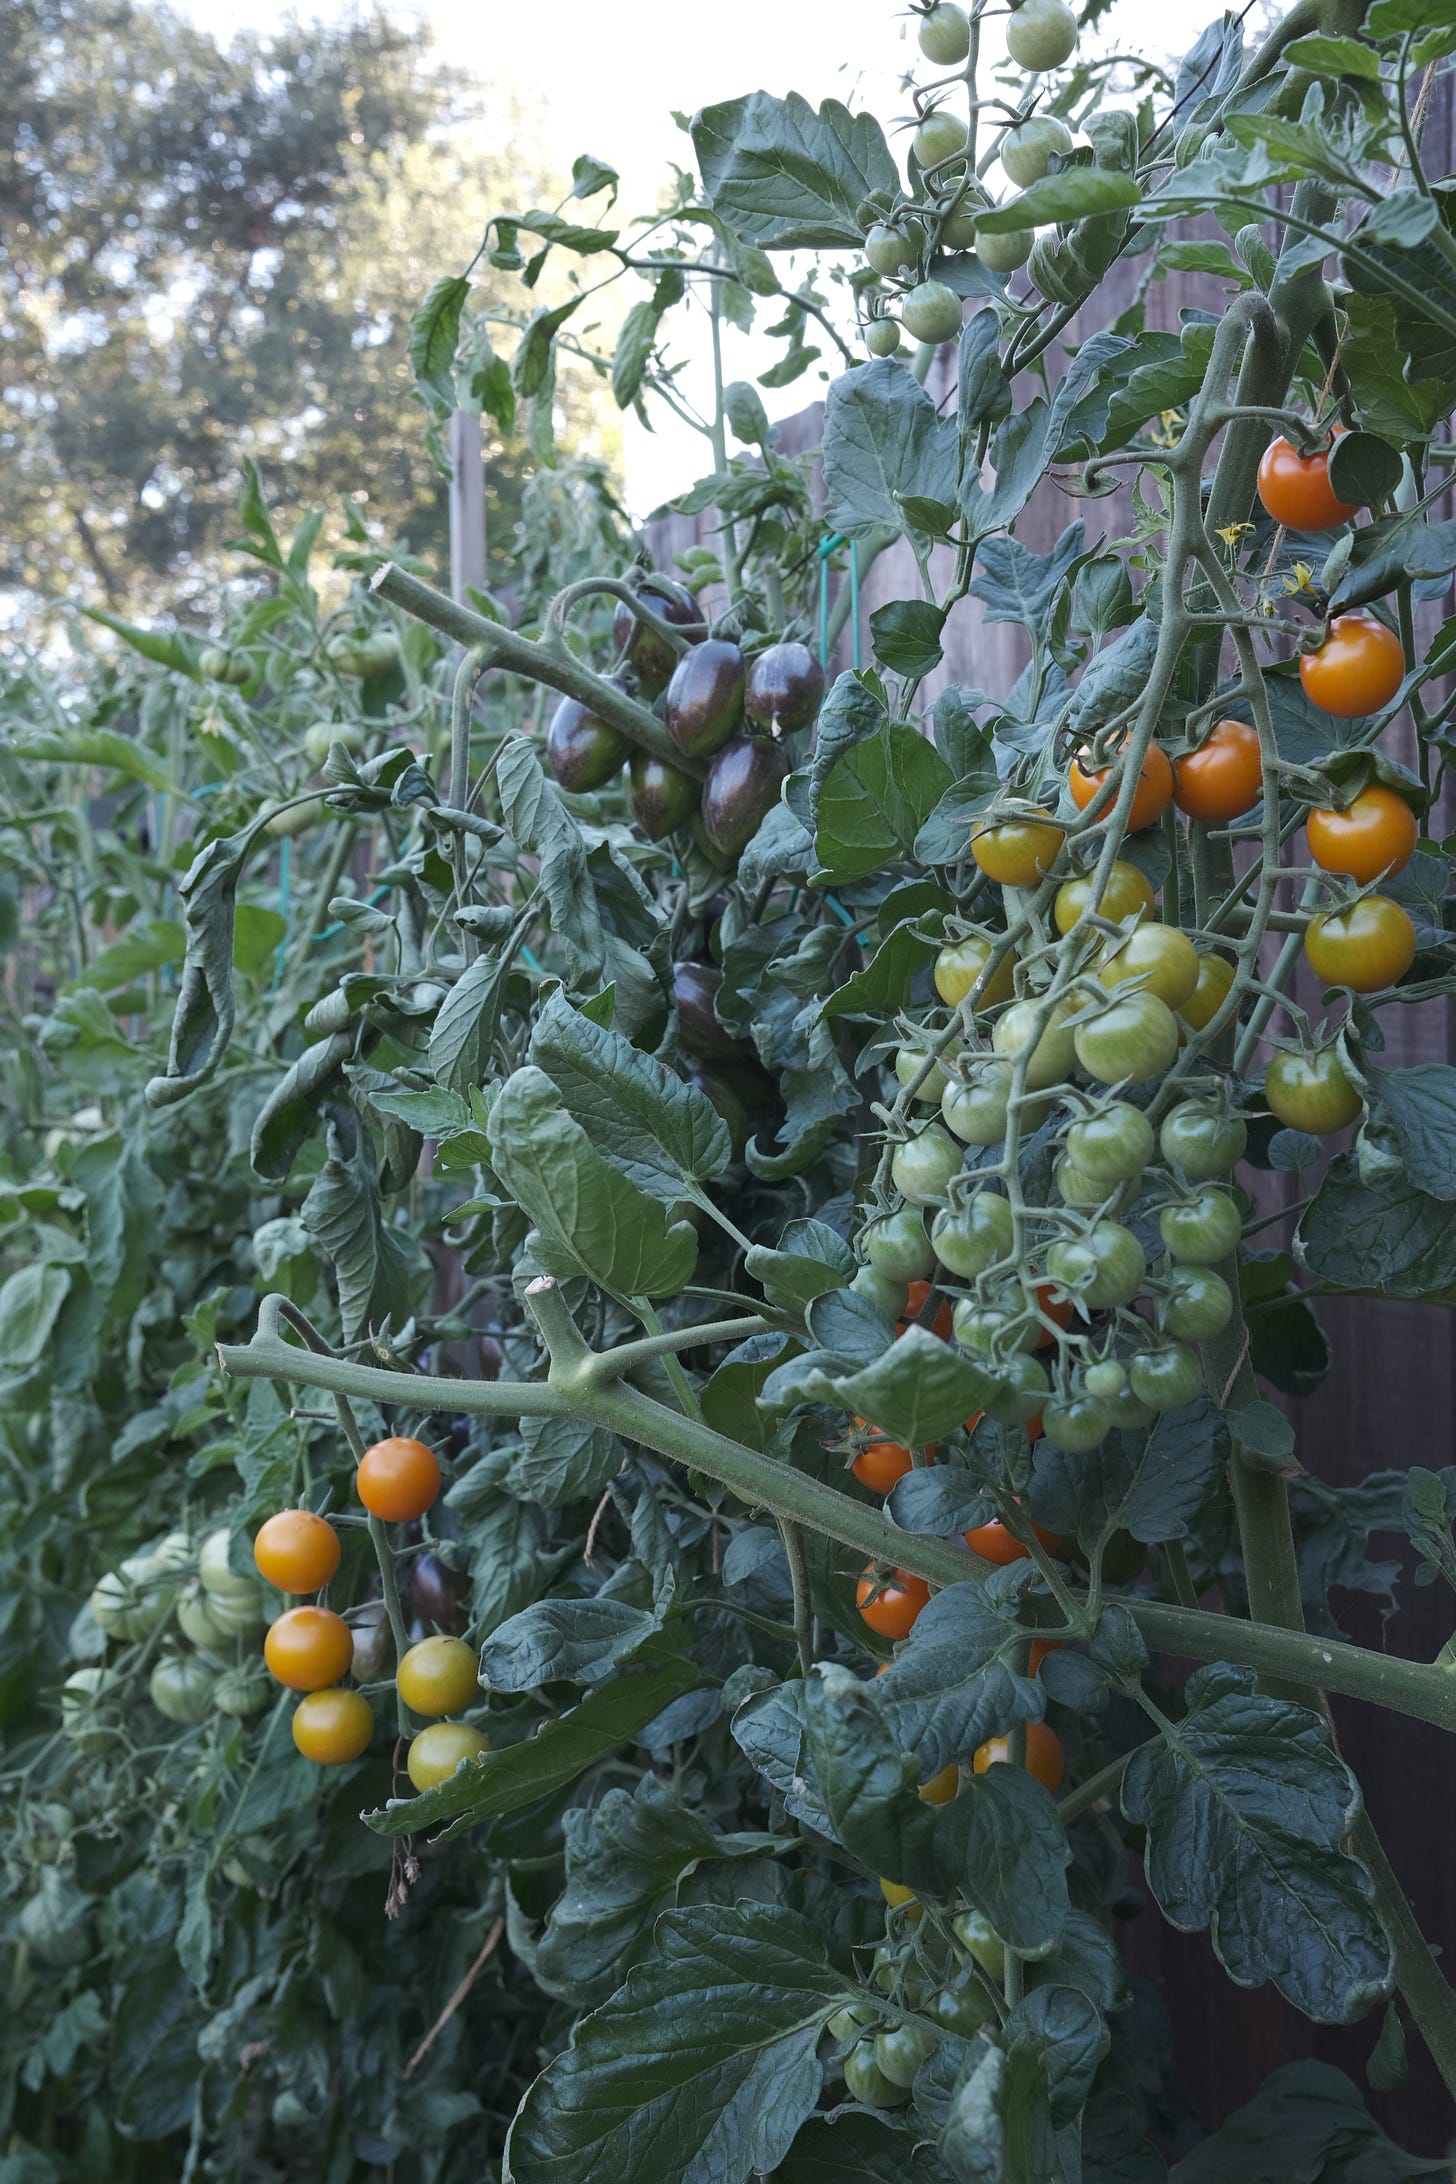 Vines of tomatoes in varying degrees of ripeness.